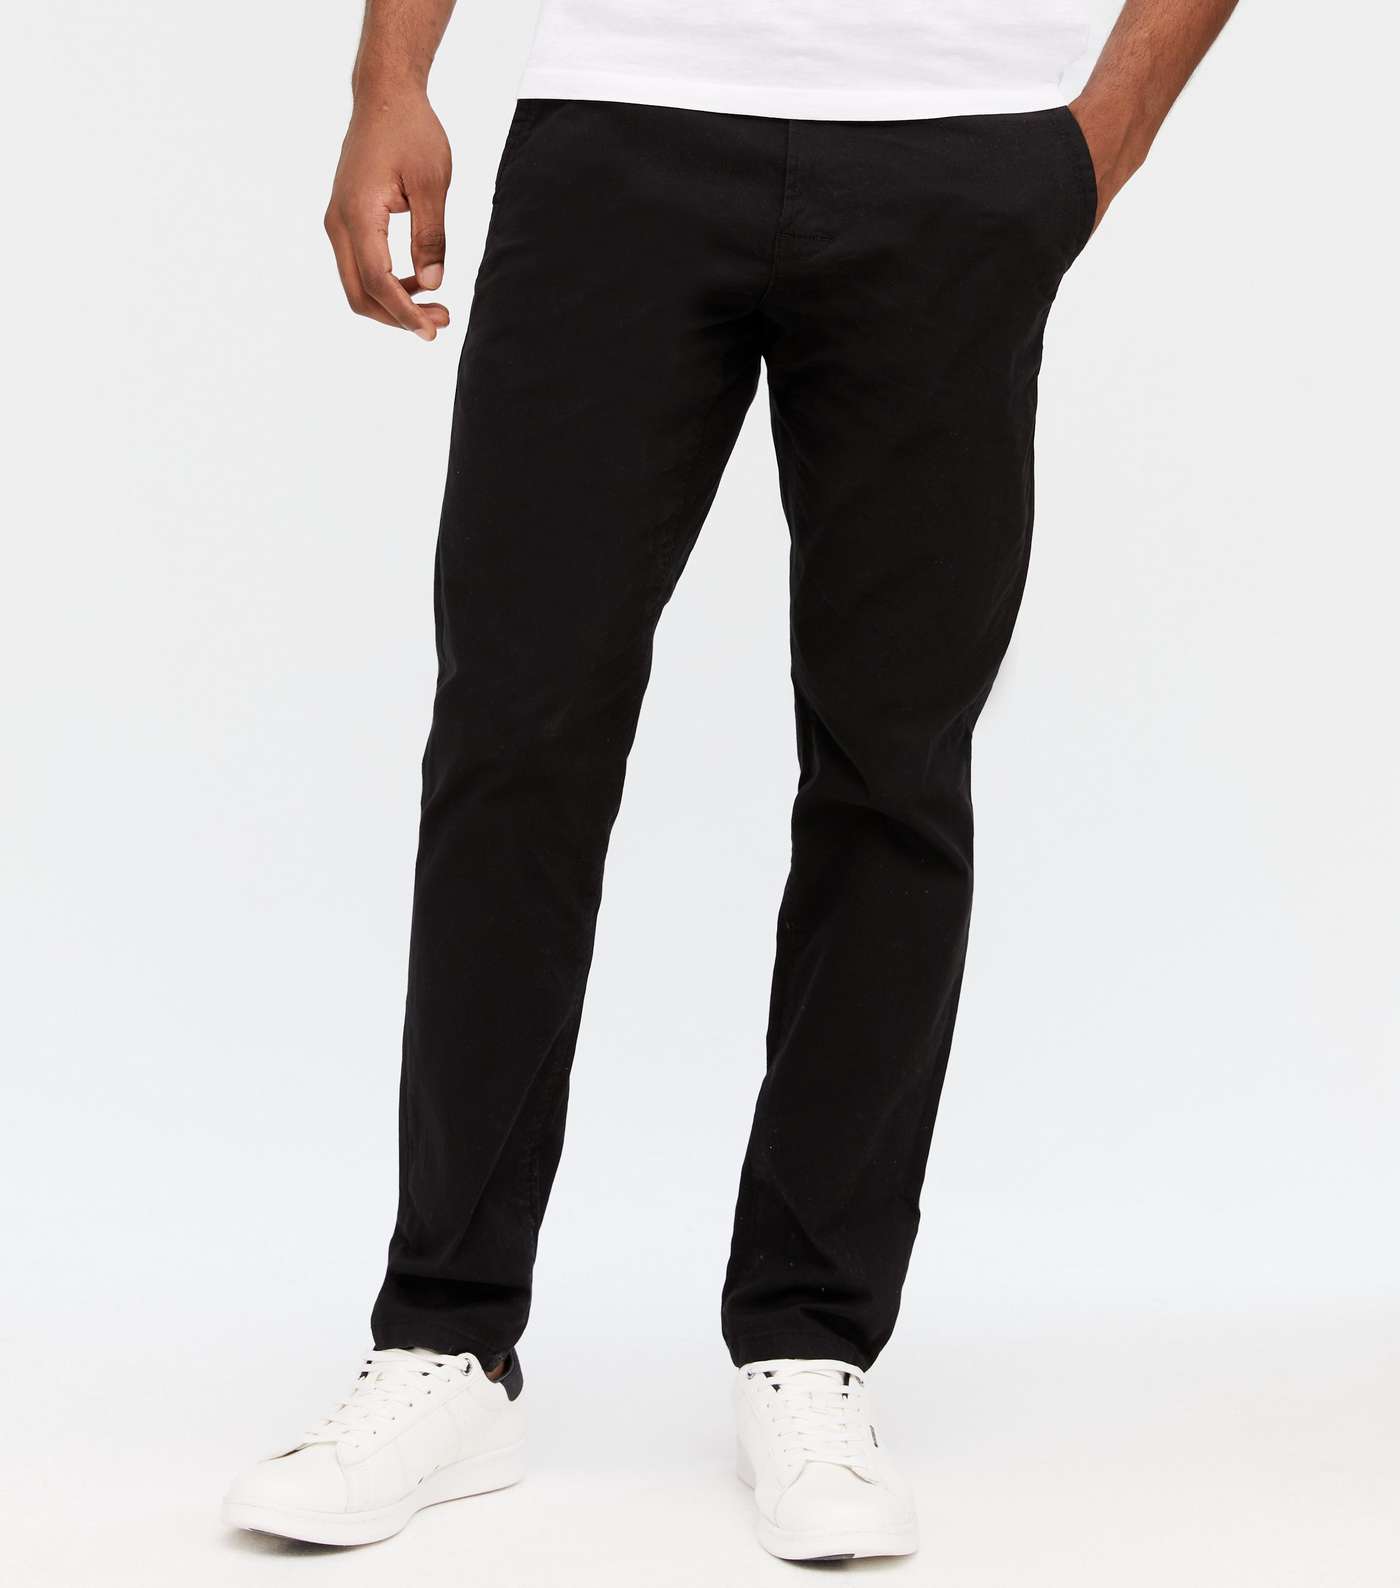 Only & Sons Black Skinny Fit Chinos Image 2